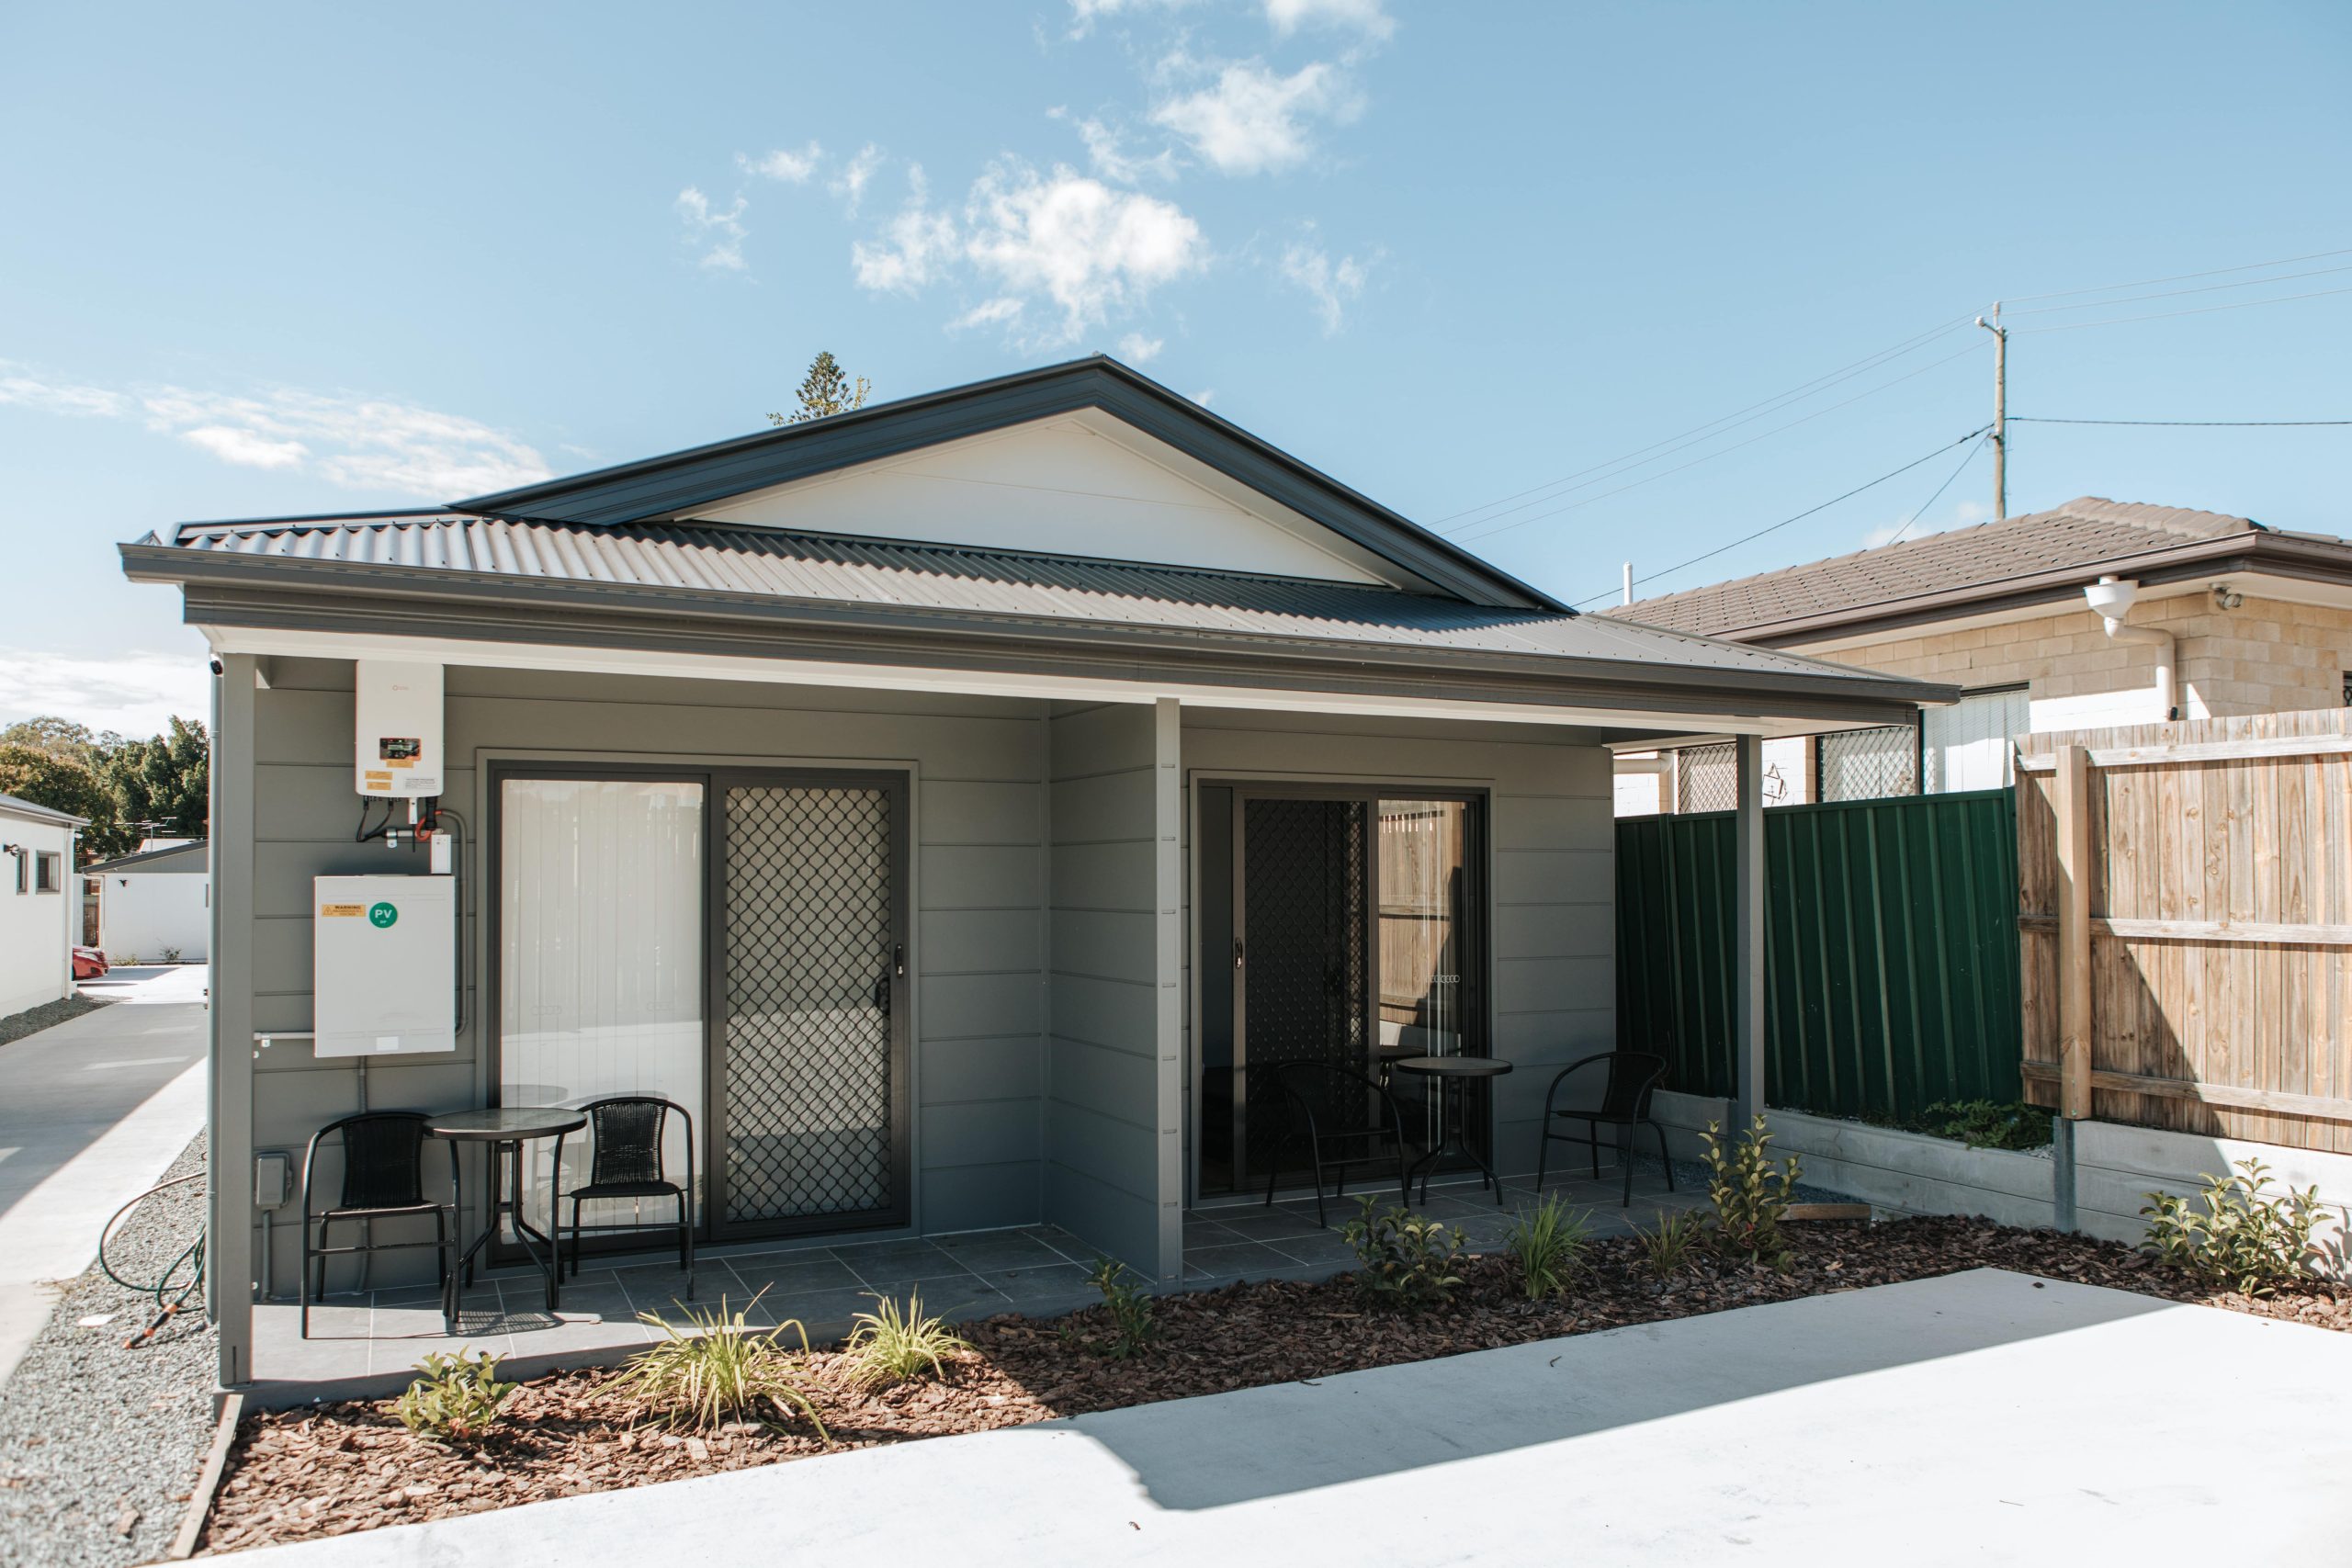 New Living Options in Darra